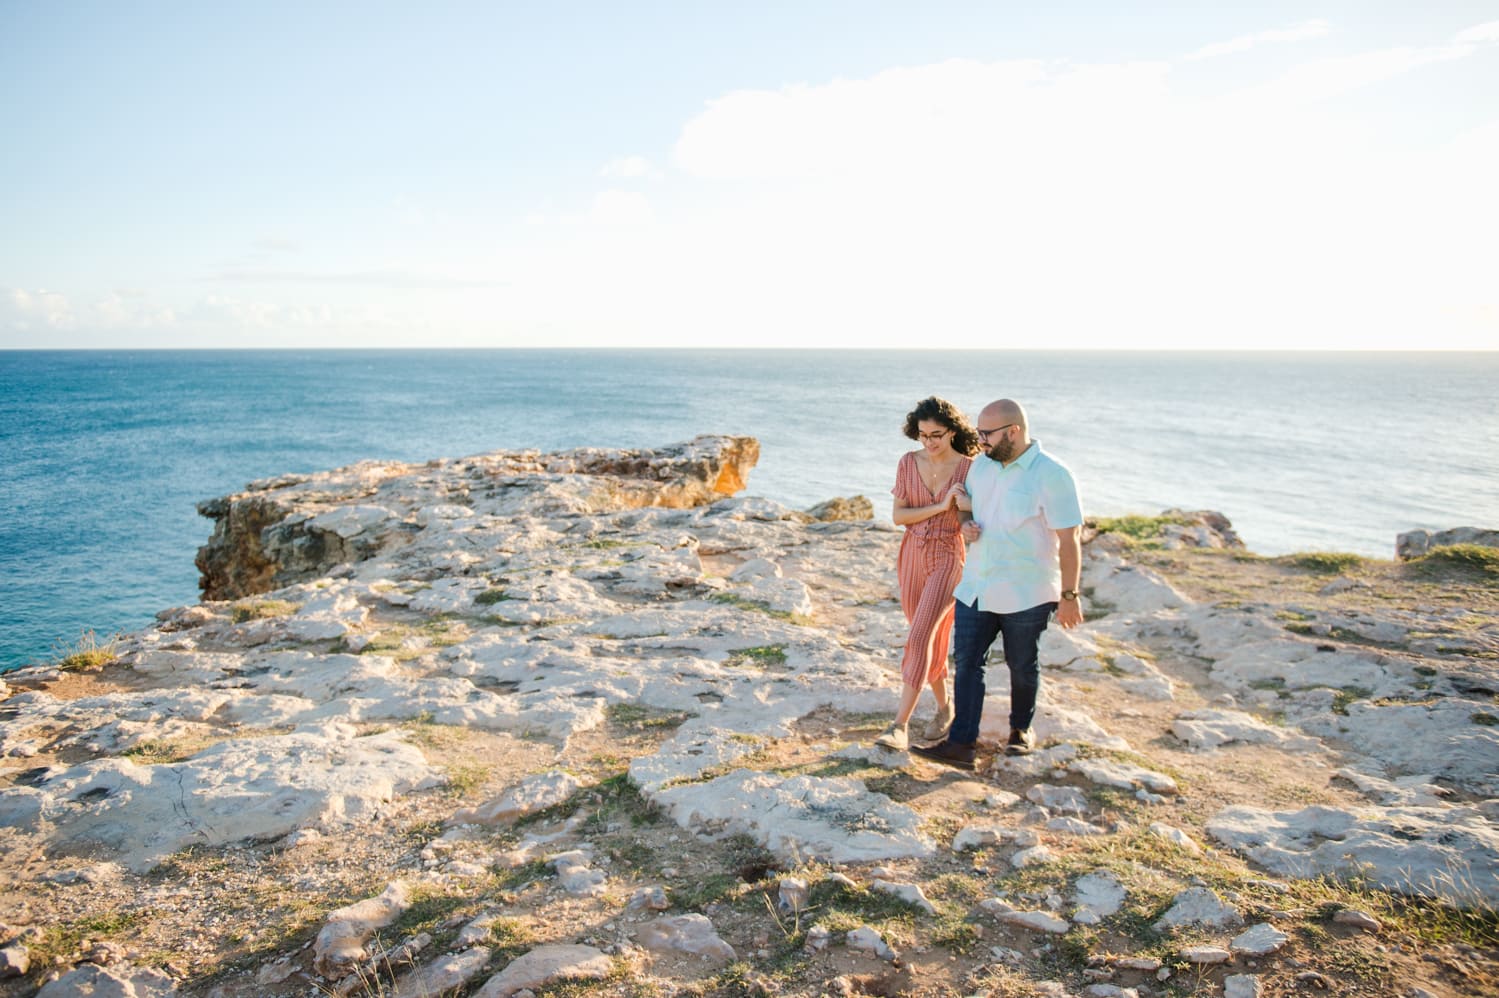 engagement portraits in Cabo Rojo Lighthouse by wedding photographer Camille Fontanez